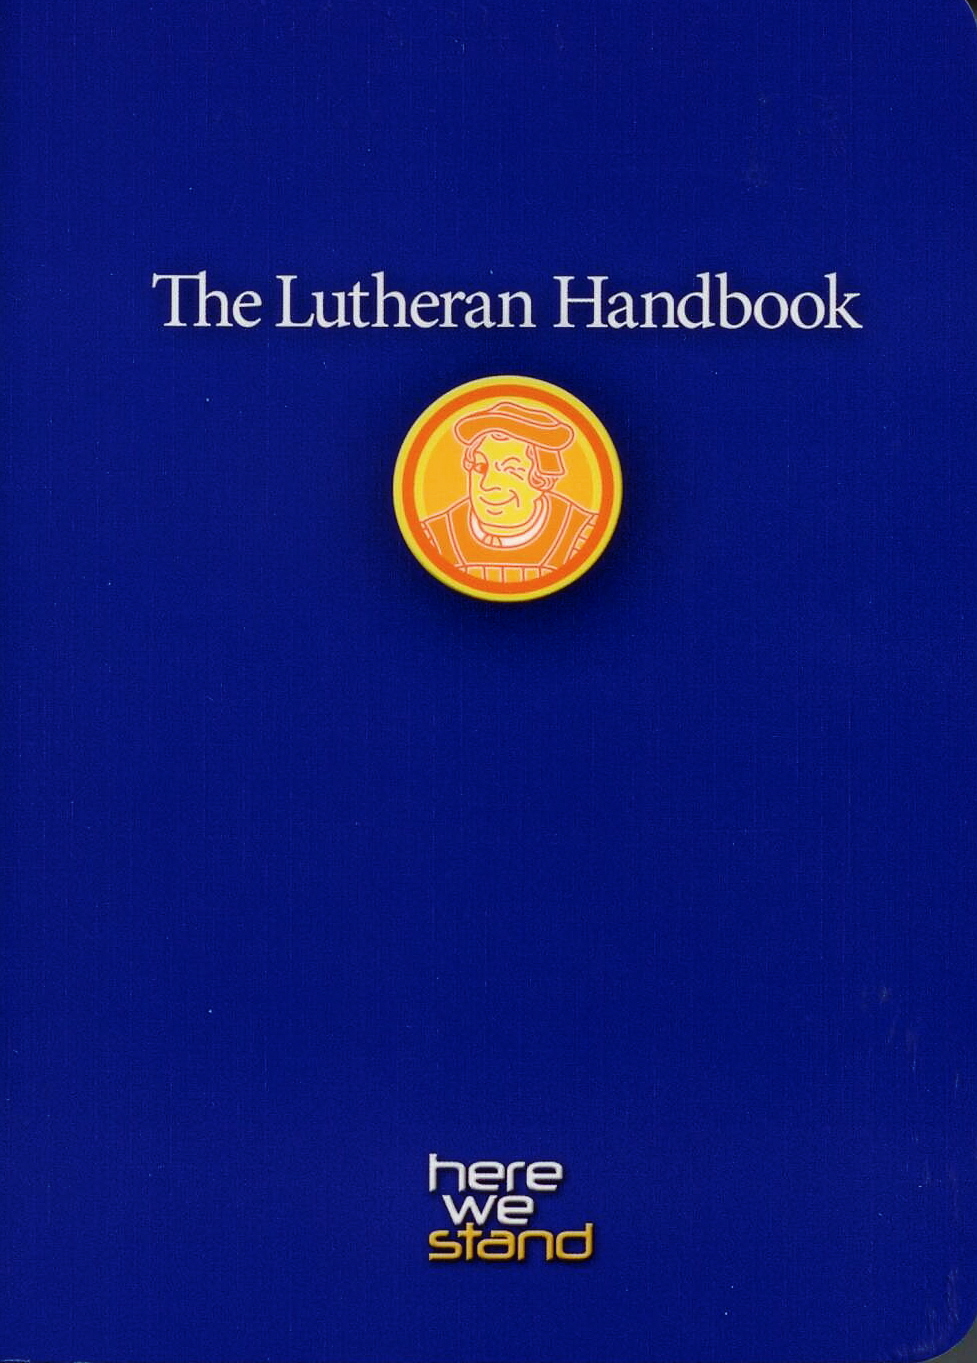 The Lutheran Handbook by Augsburg Fortress